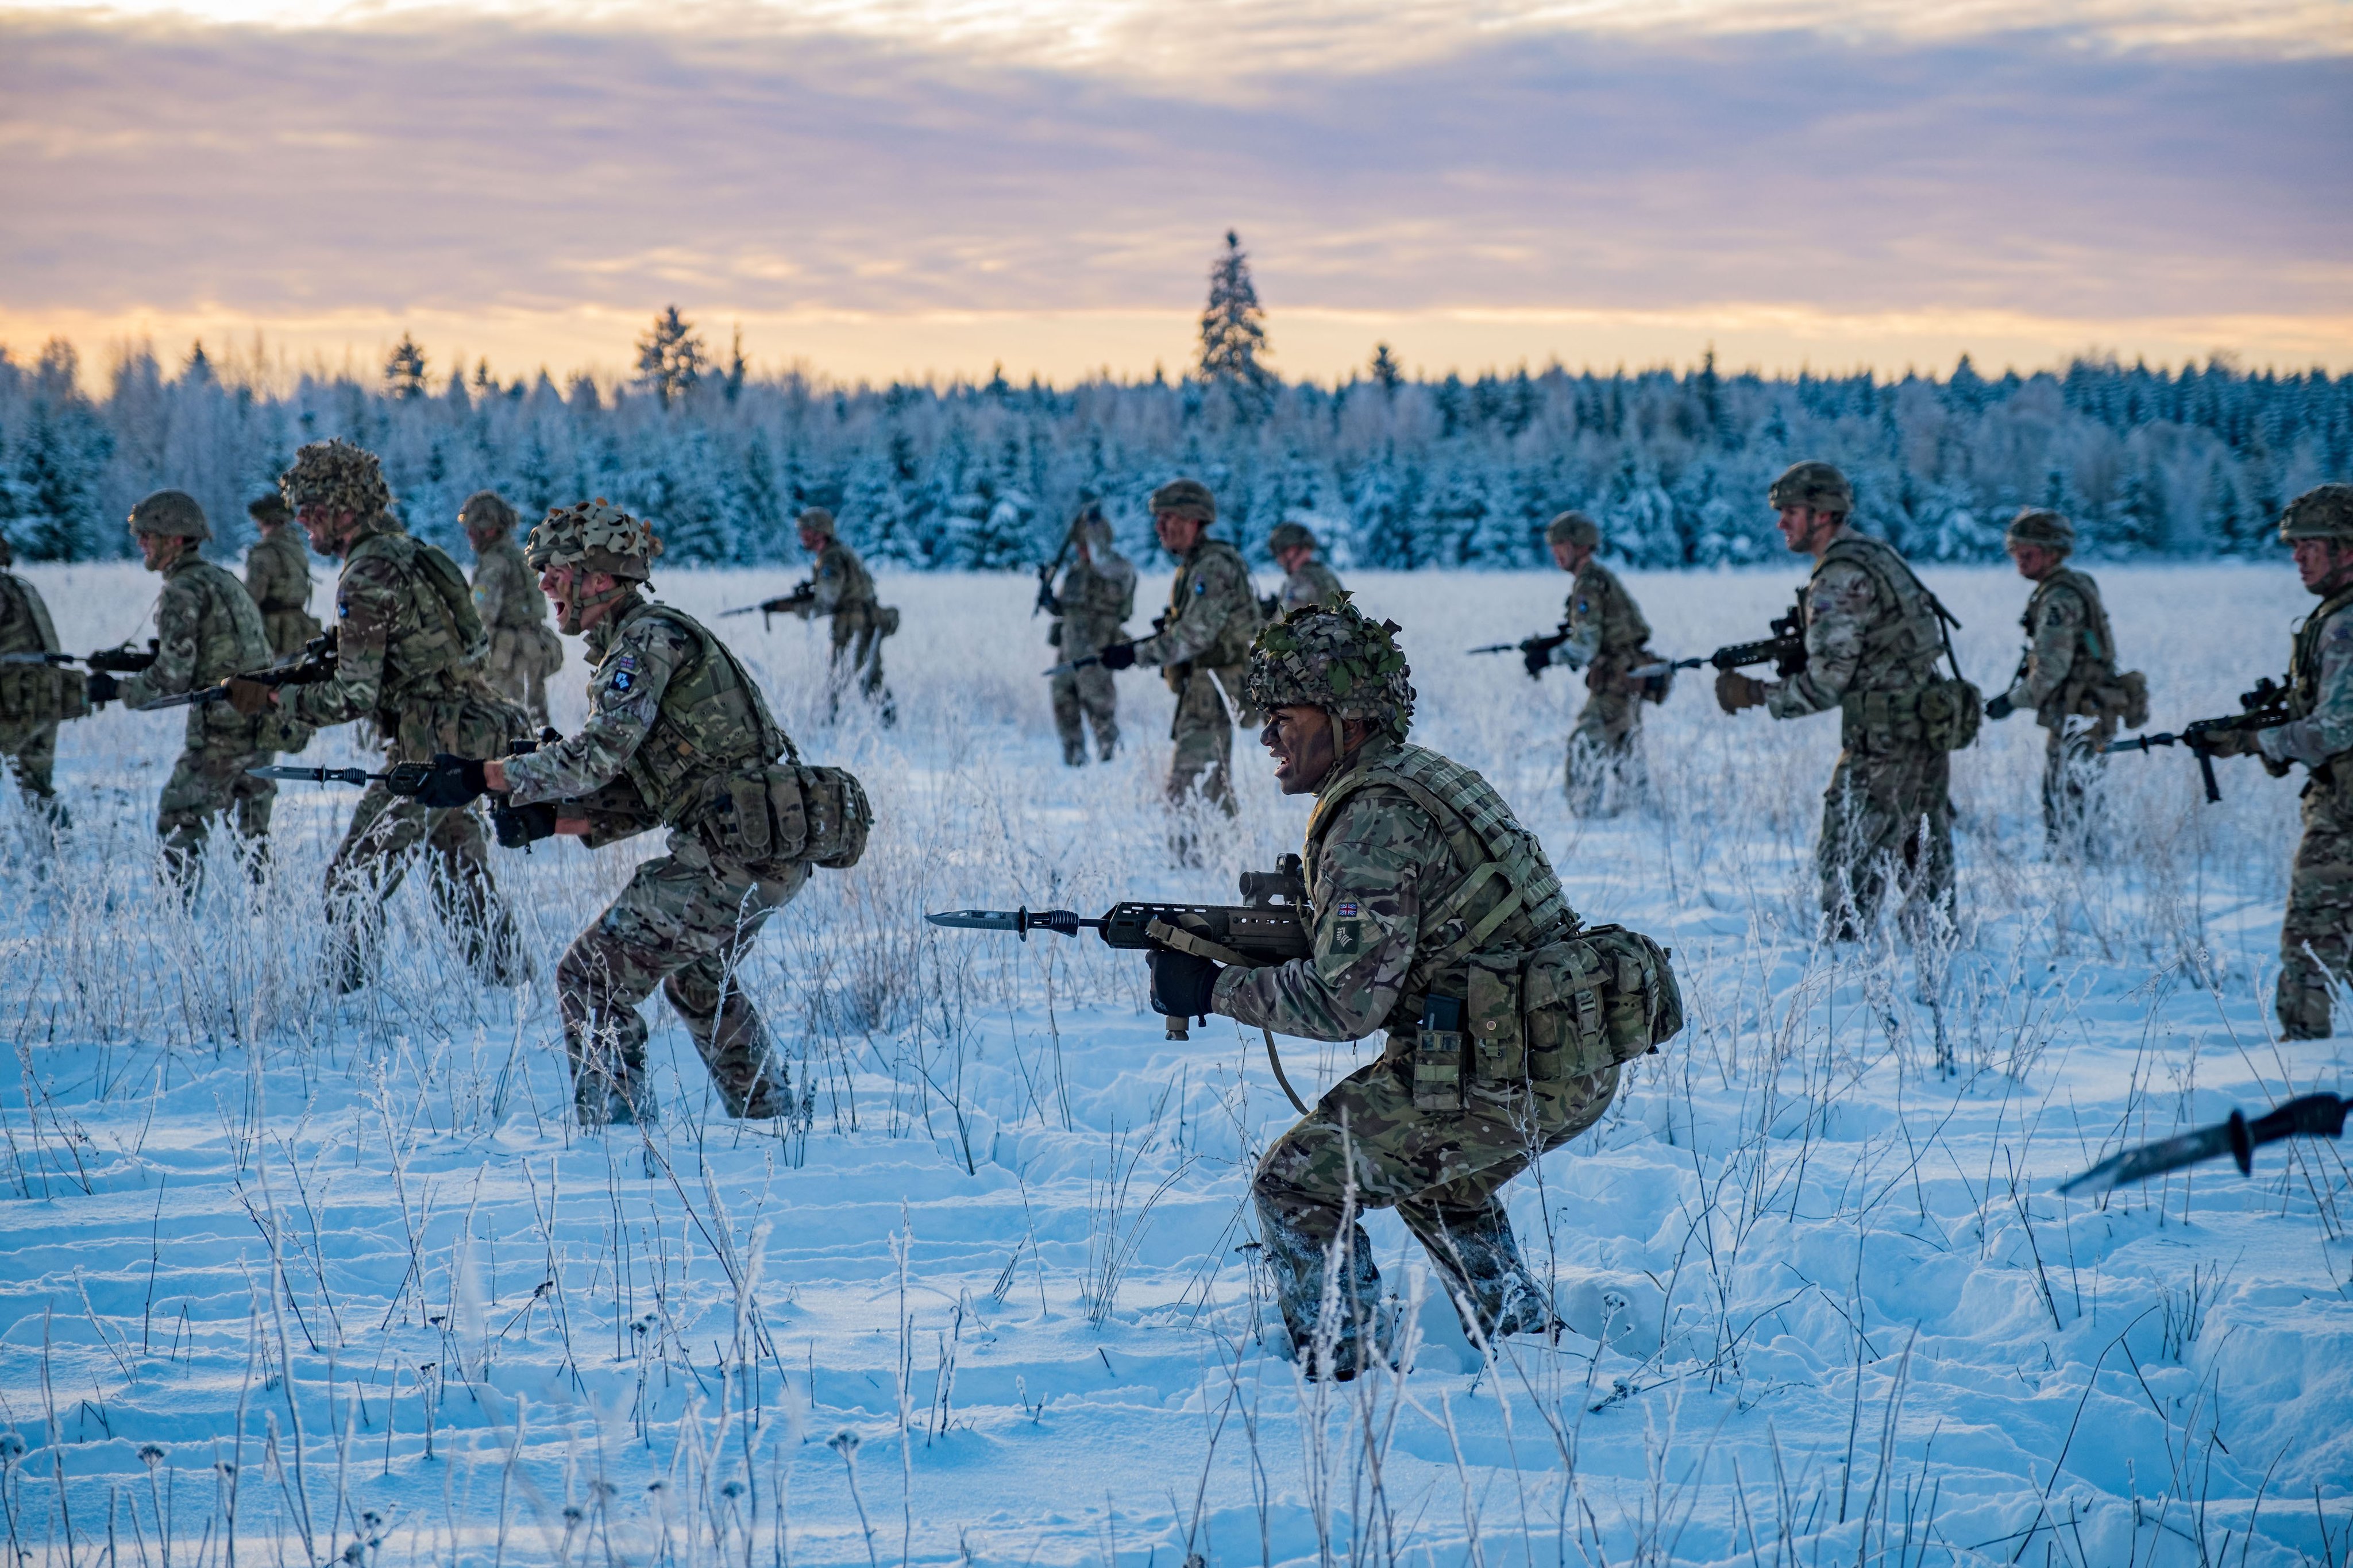 UK Armed Forces stand on guard in a snowy field as part of an exercise.